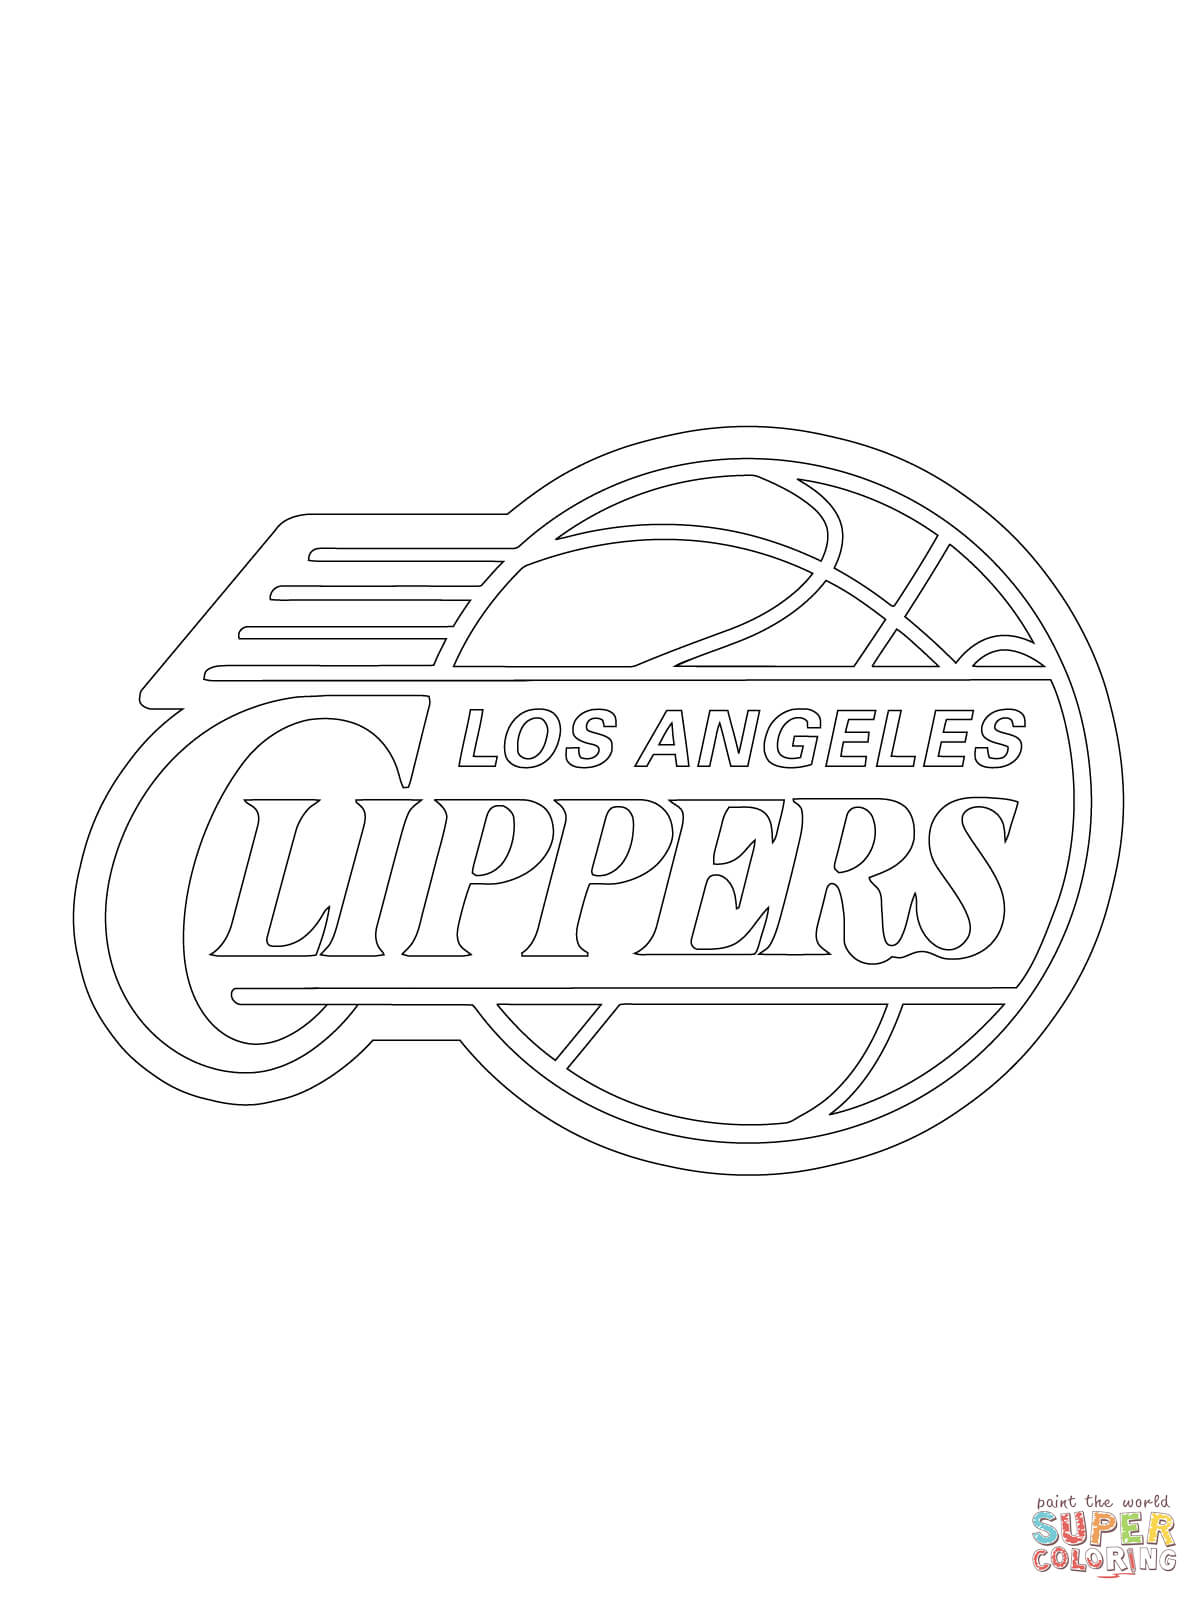 Los Angeles Clippers Logo coloring page | Free Printable Coloring ...